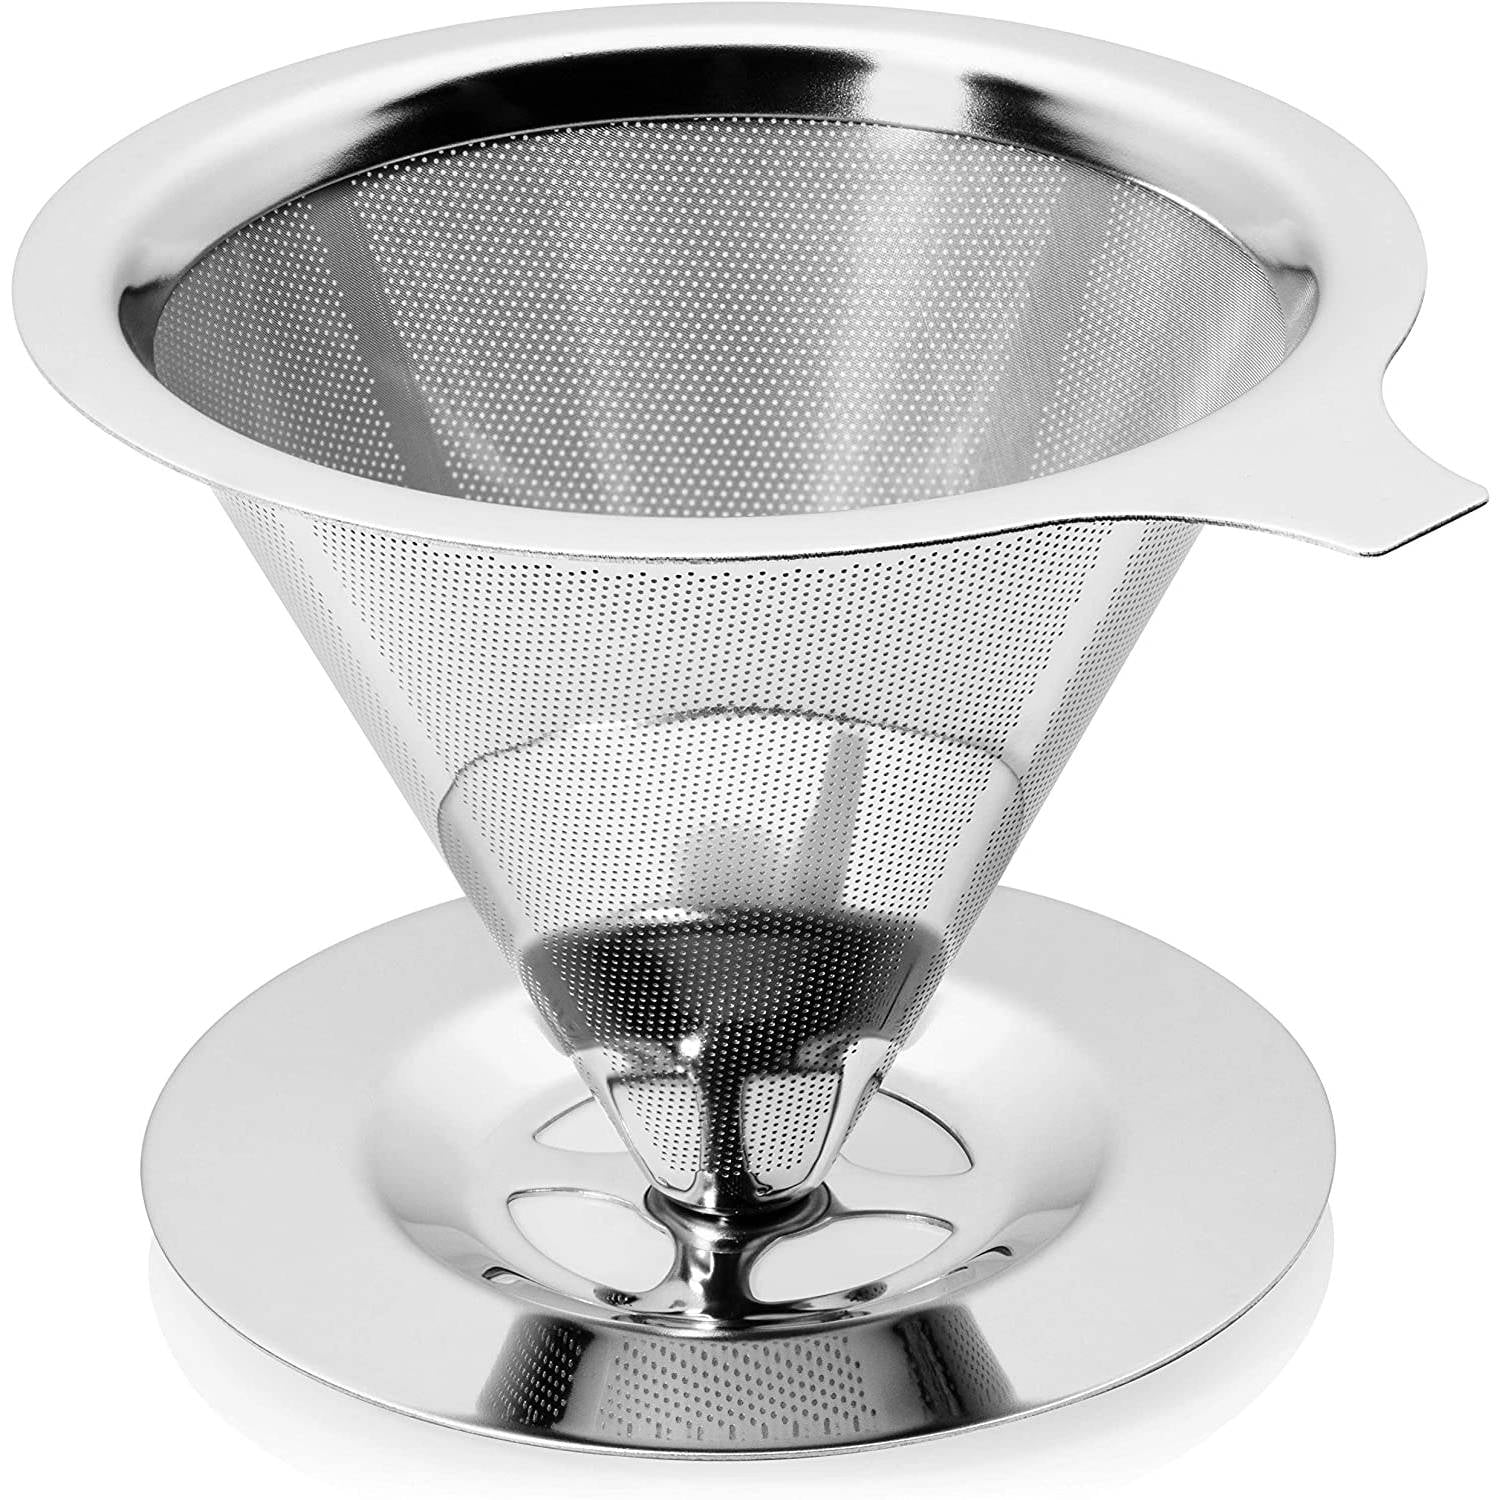 Home Office Coffee Maker Stainless Steel Resuable Cone Coffe Filter Silver 